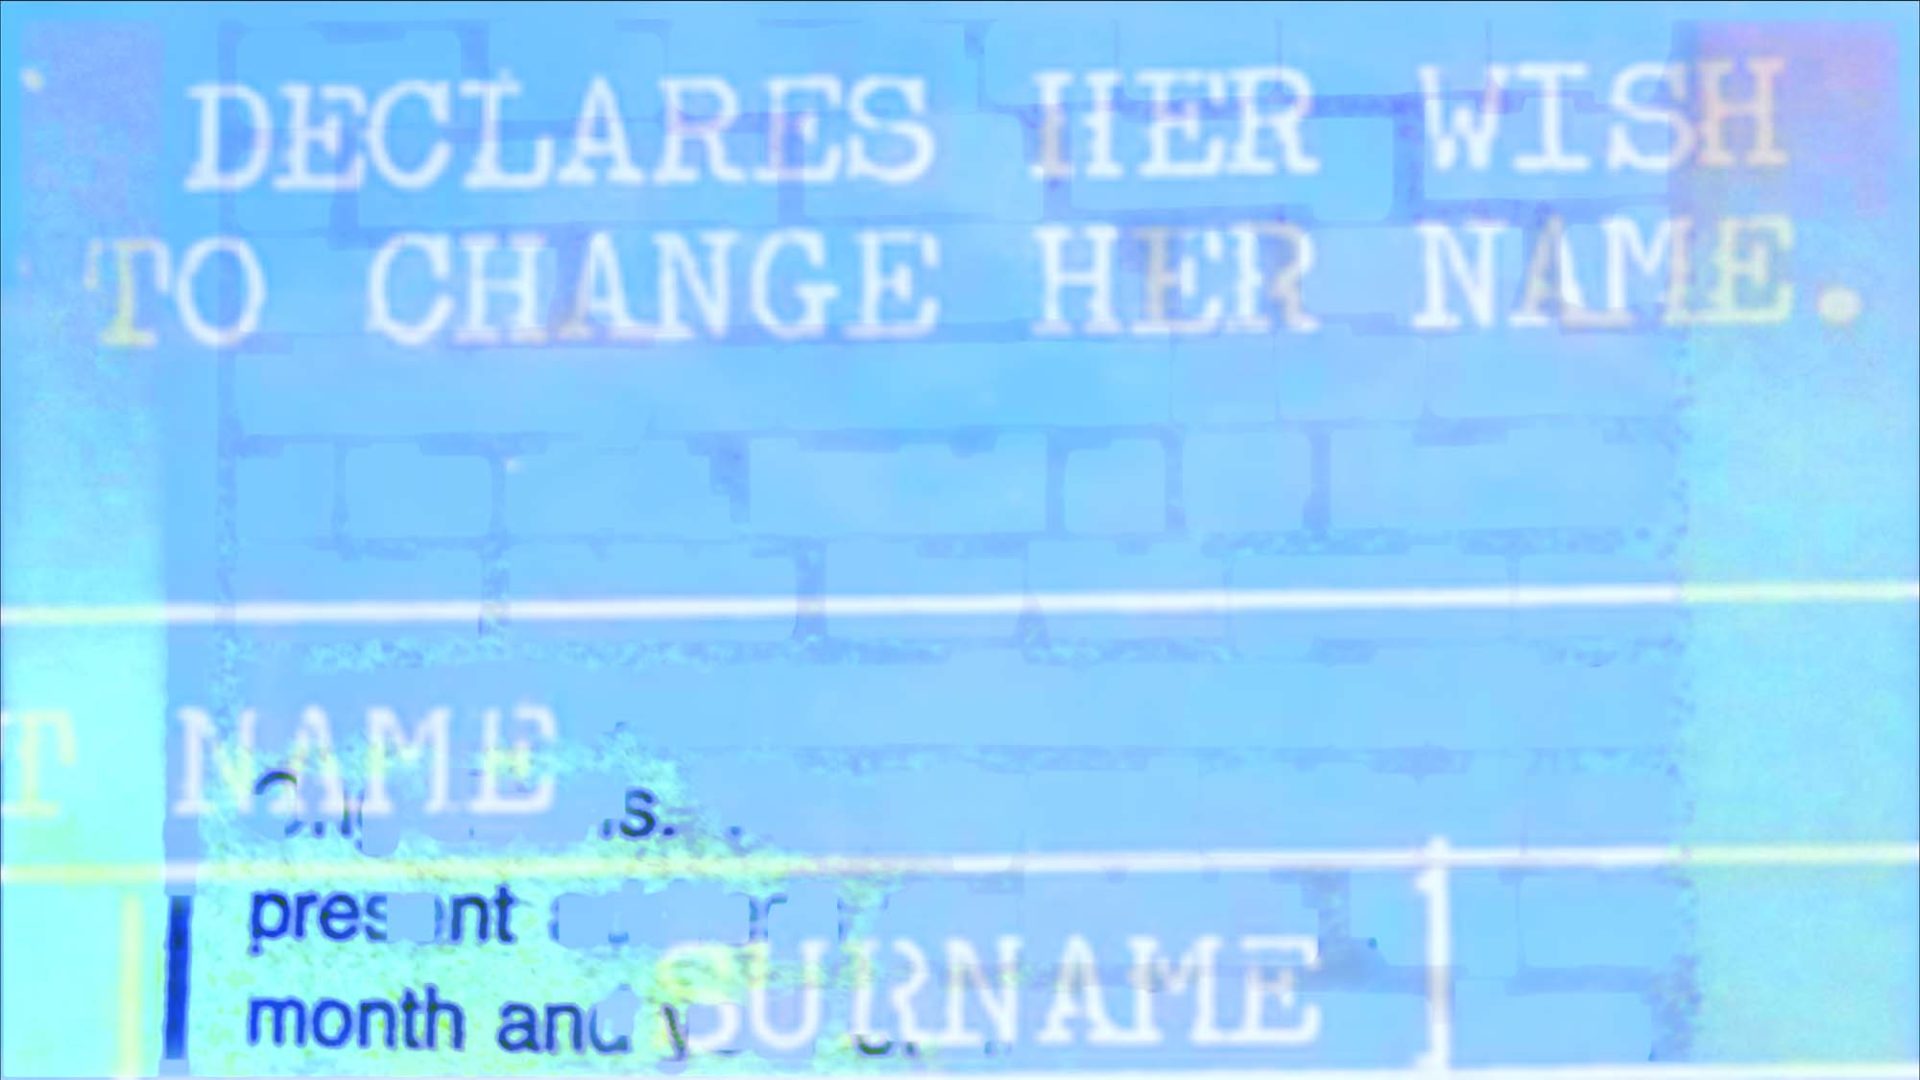 A still from Identity Karma by Olivia Ong Evans. A bright blue and turquoise video still. There are multilayered legal documents and forms that are abstracted and blurry, with only some words visible. The legible text includes “Declares her wish to change her name,” “Name,” and “Surname.”